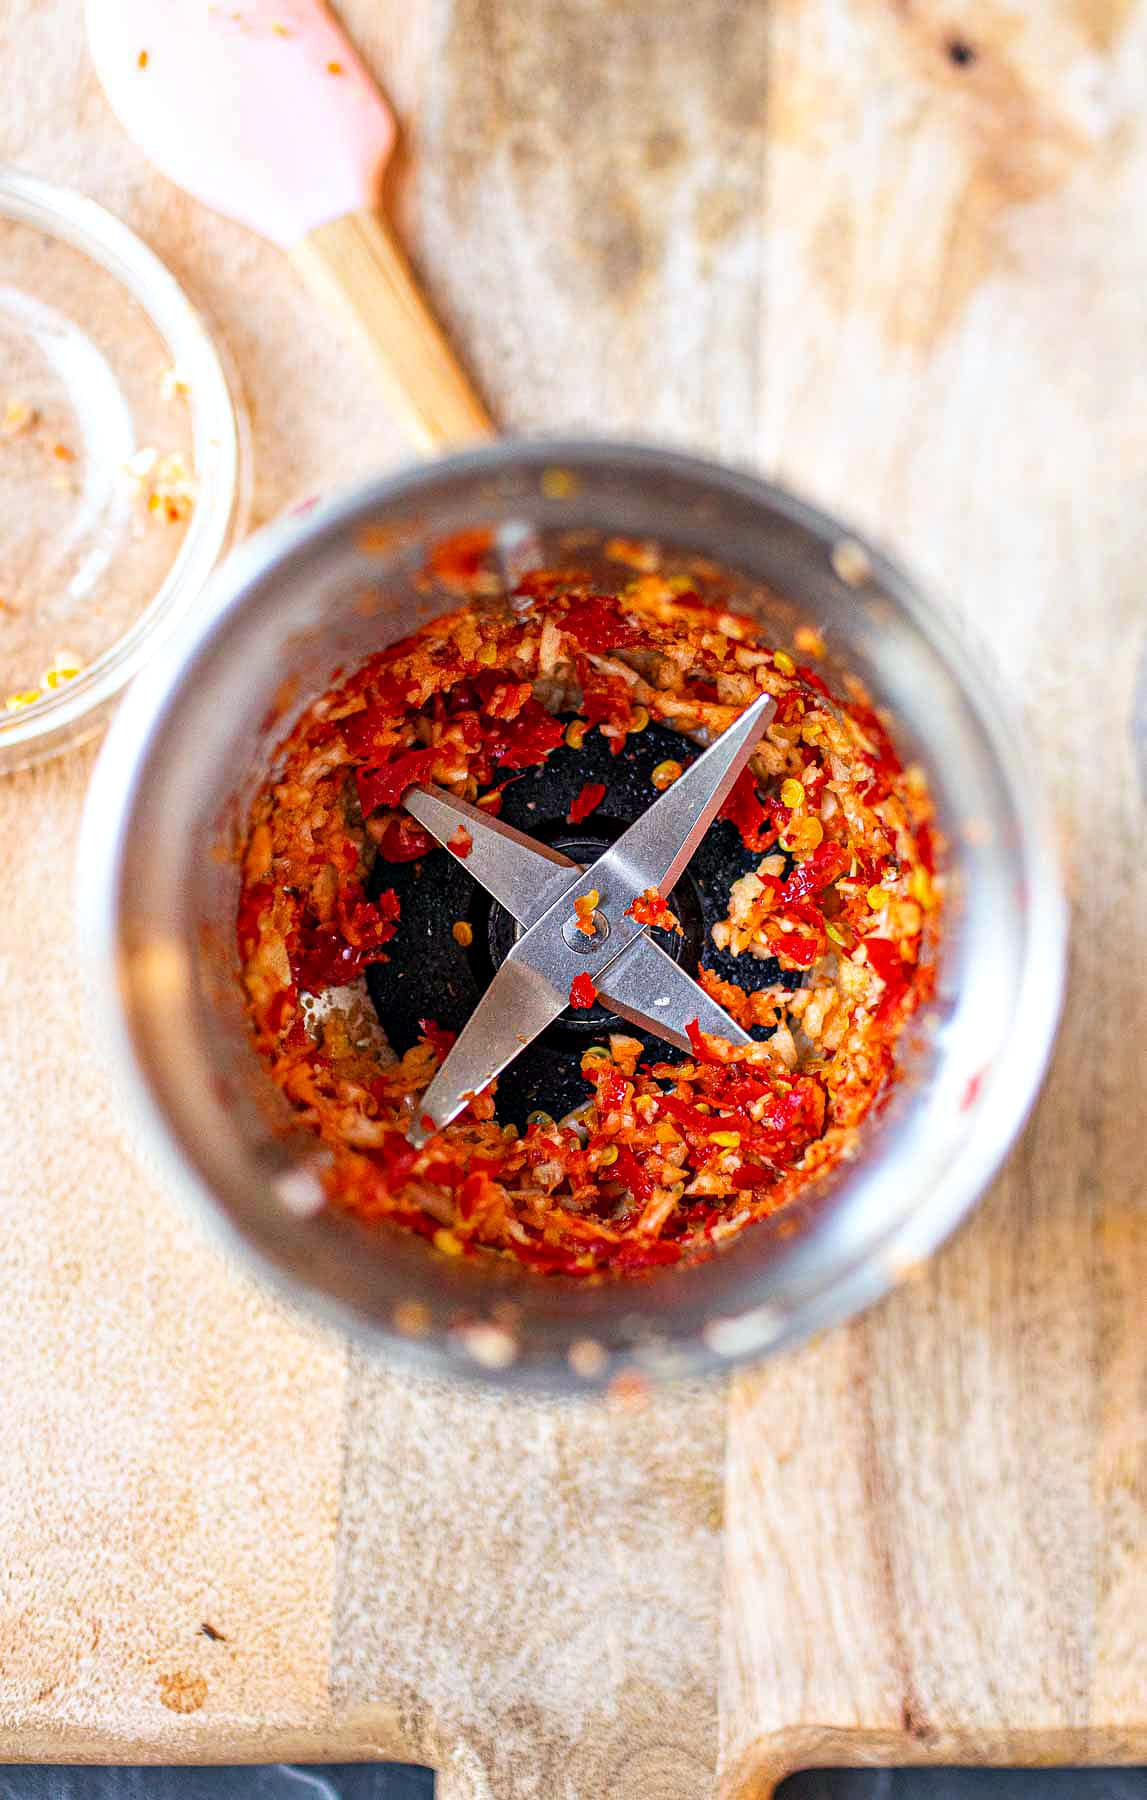 chili garlic blended in a spice grinder